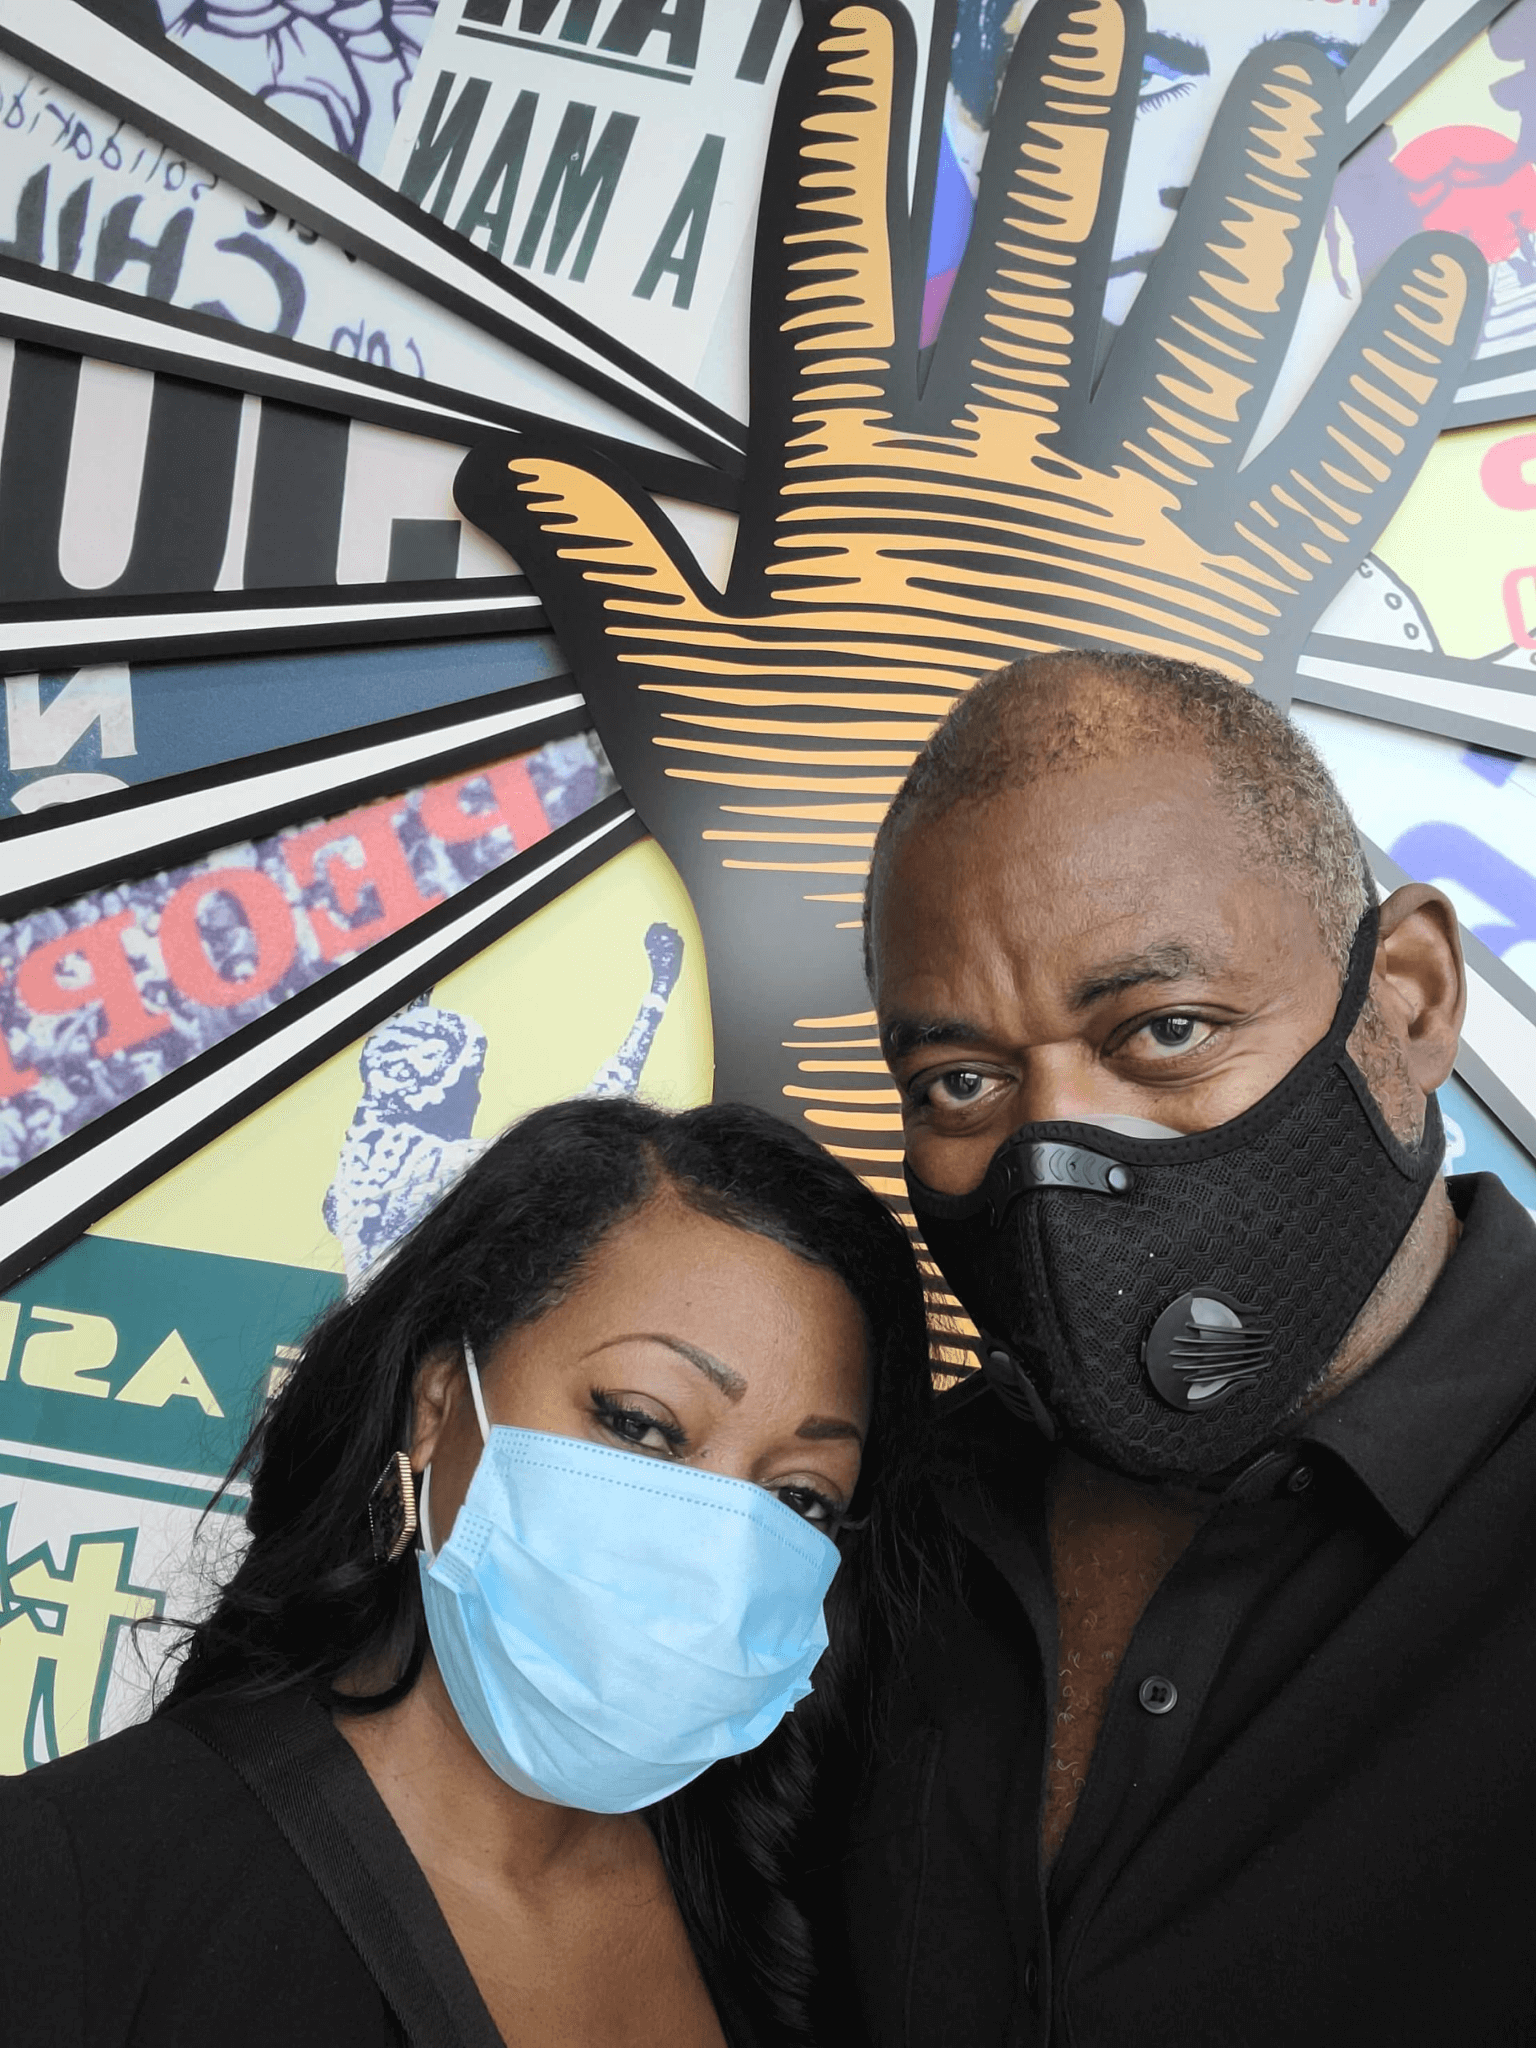 Couple wearing face masks taking a selfie in front of a mural